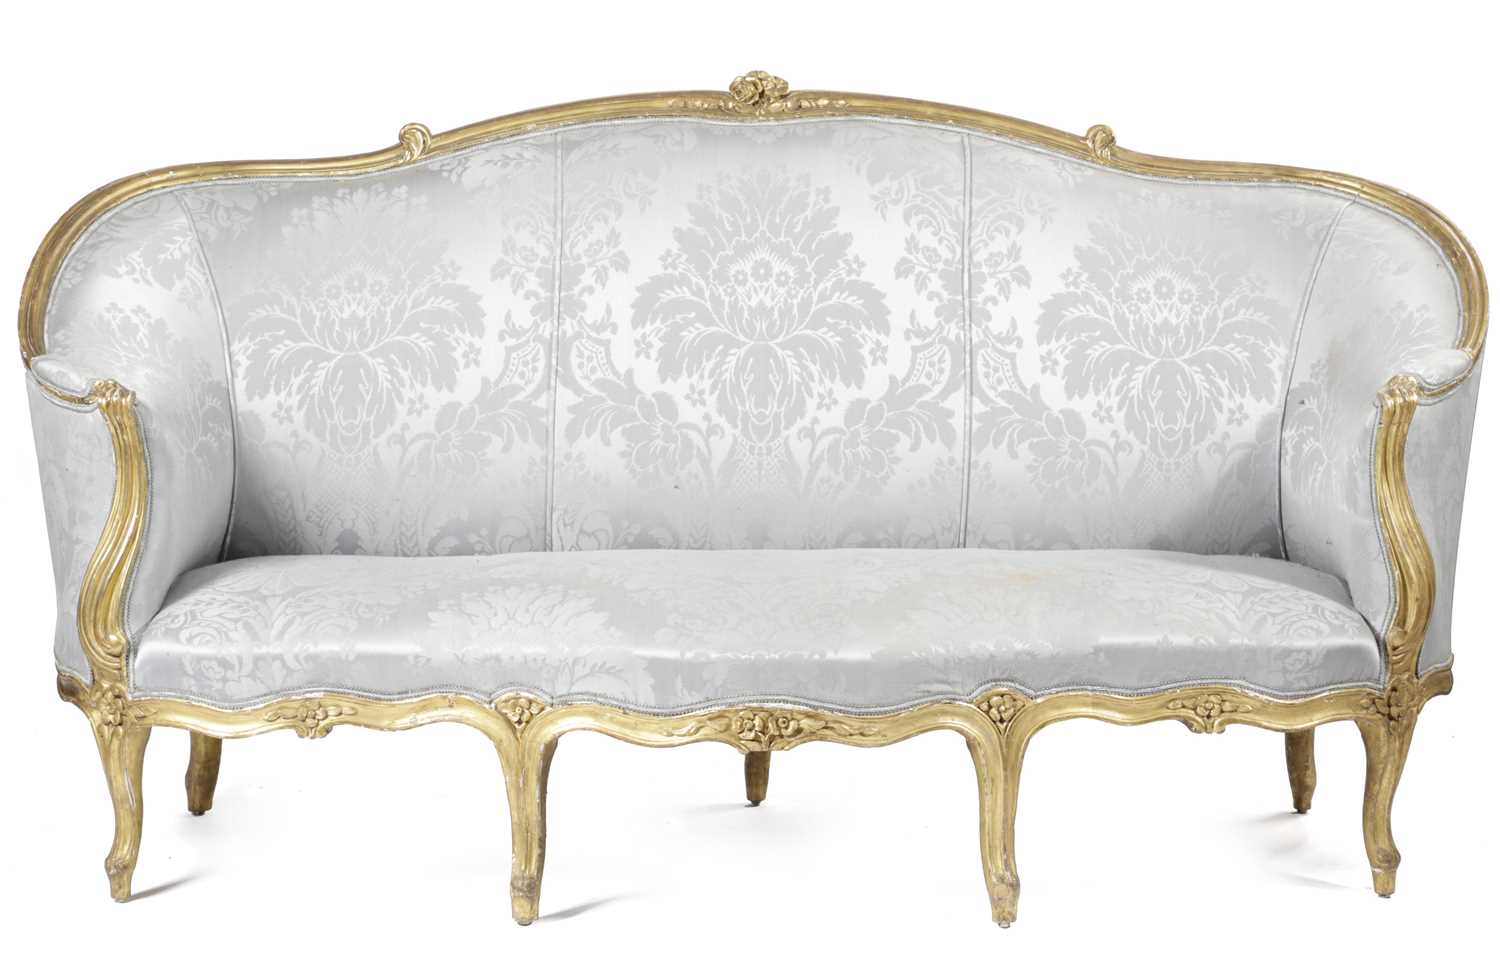 A FRENCH GILTWOOD CANAPE IN LOUIS XV STYLE, 19TH CENTURY the moulded frame carved with flowers and